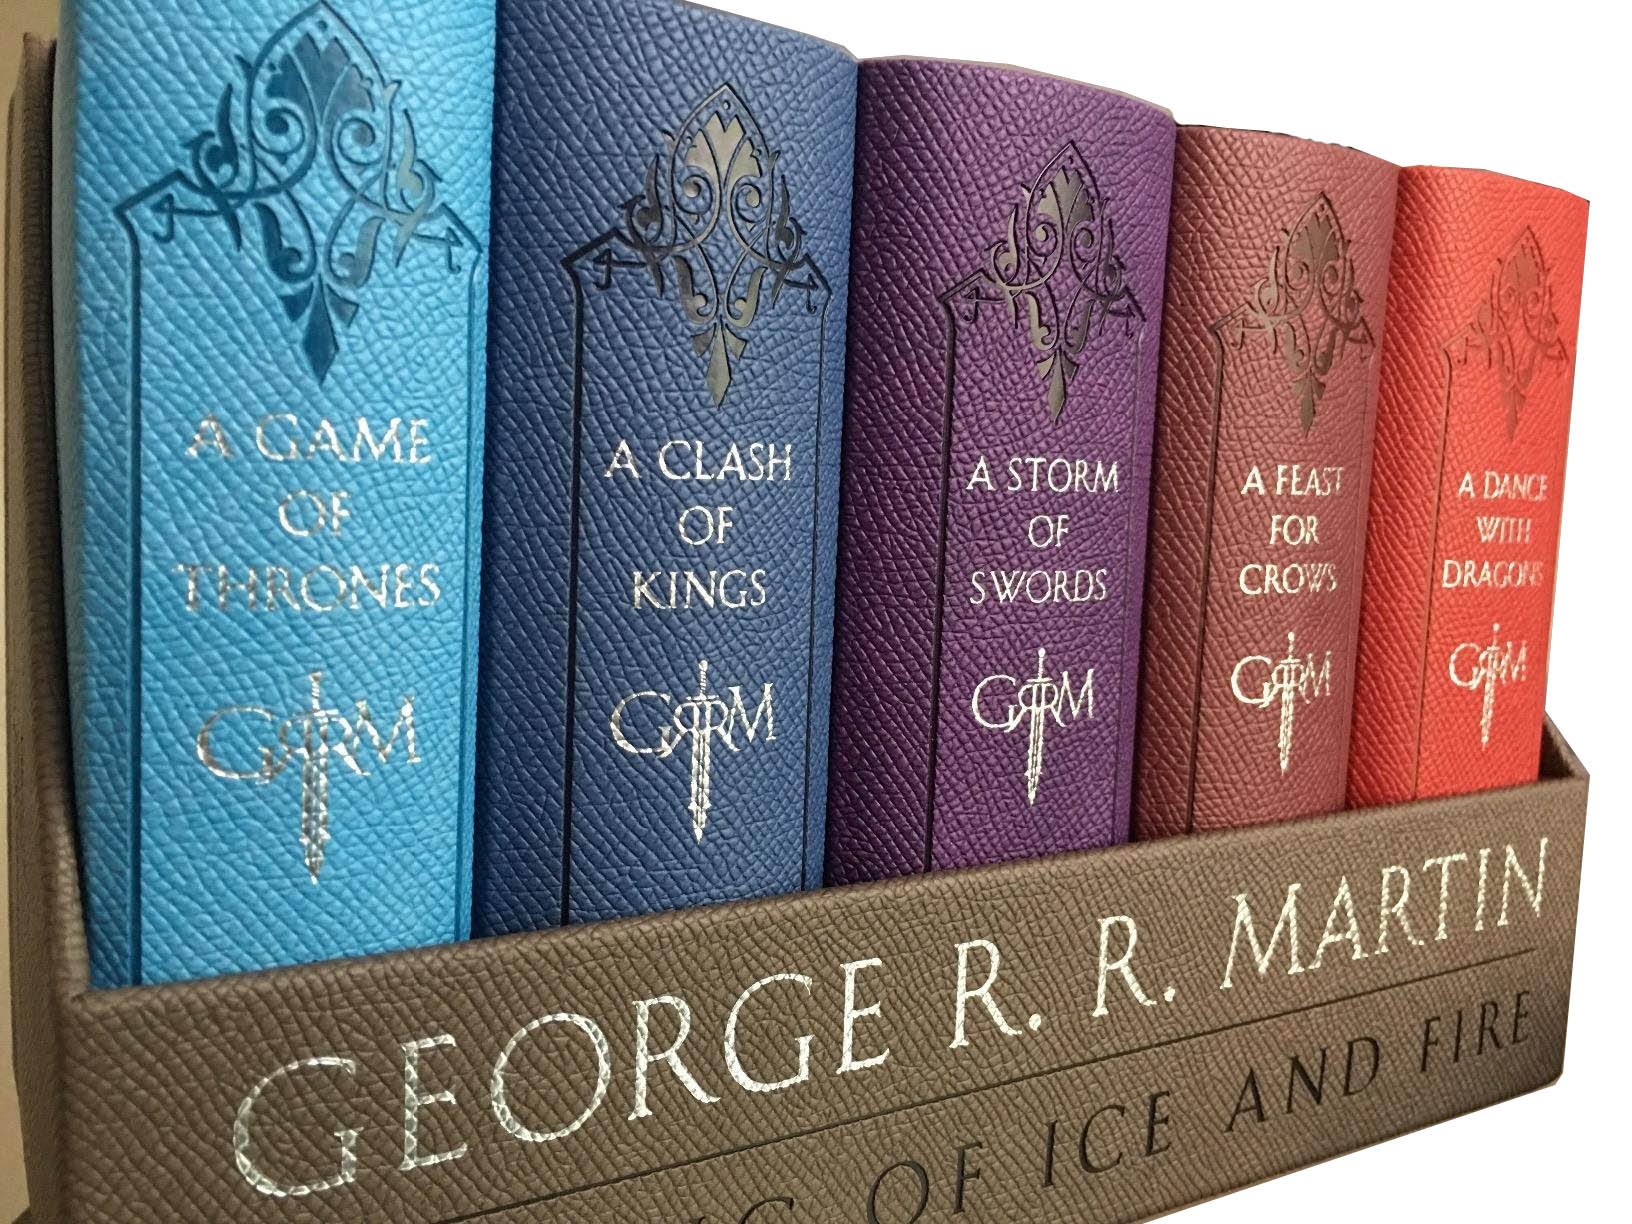 Buy Game Of Thrones Set By George R. R. Martin 